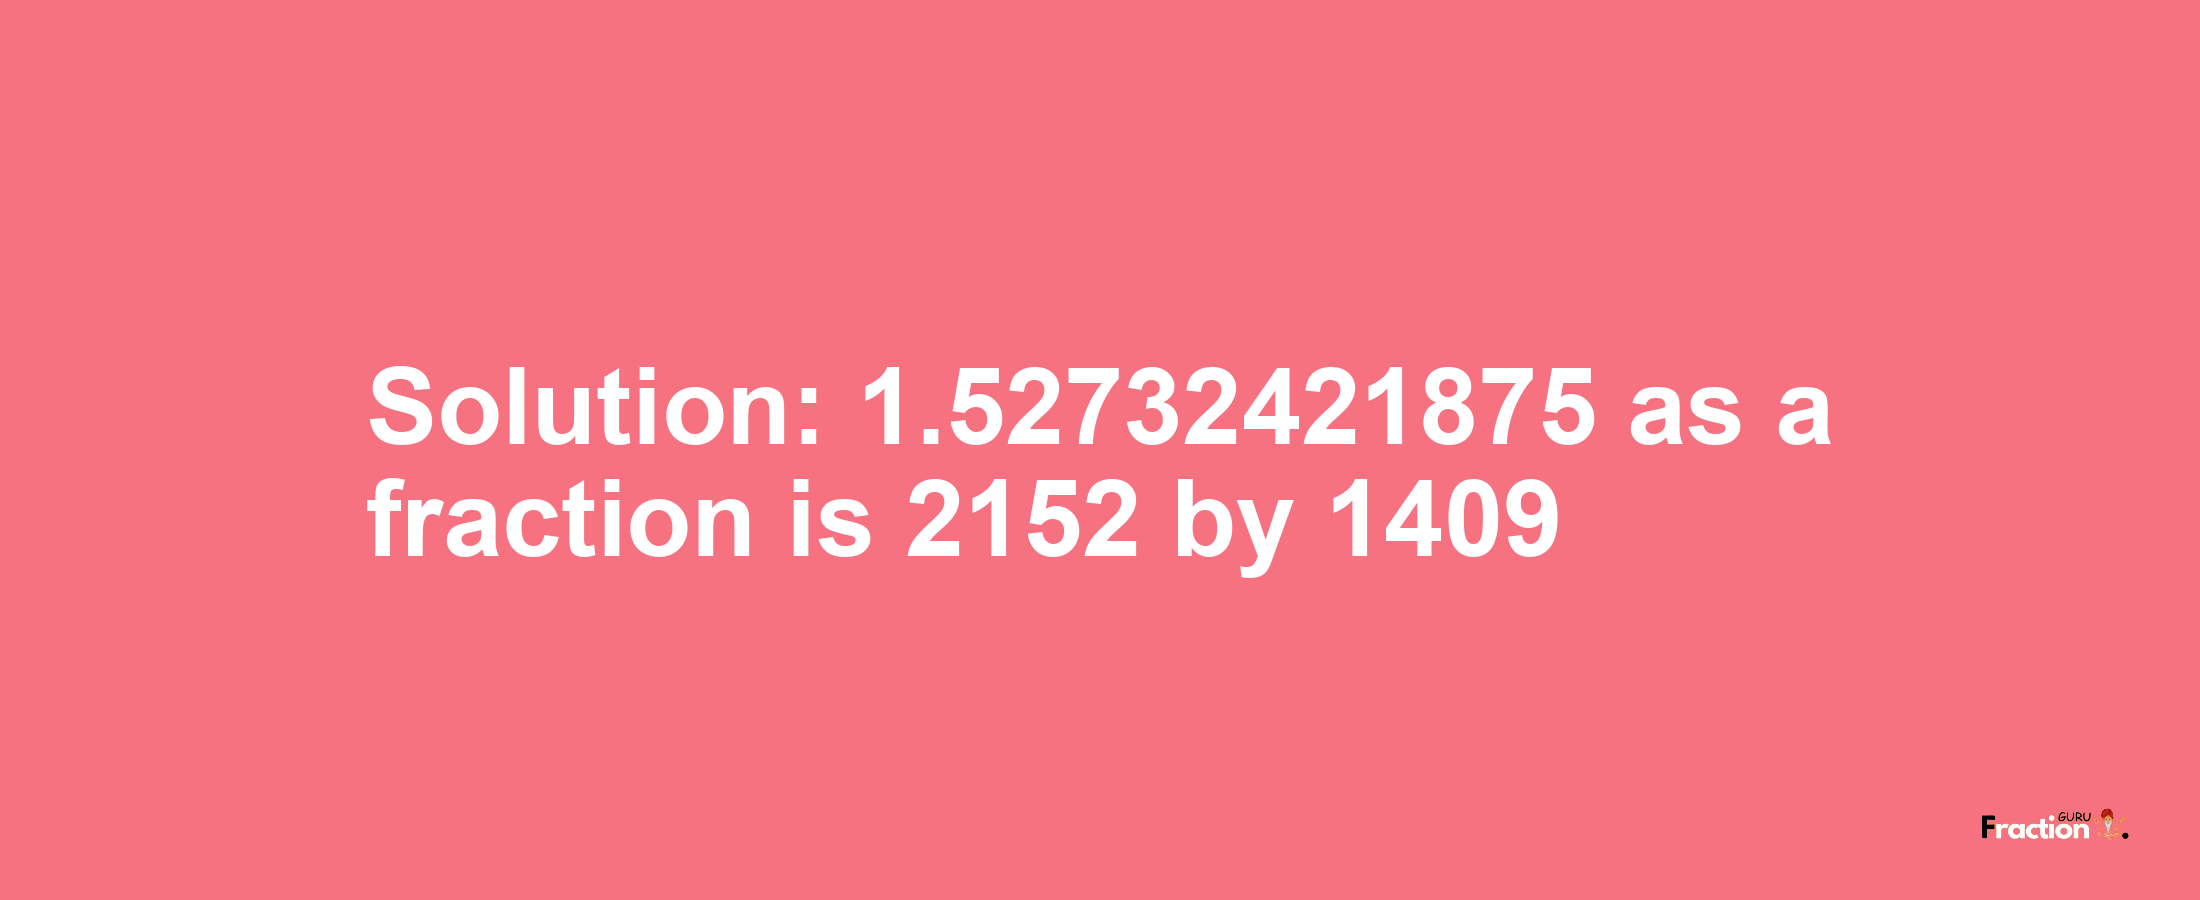 Solution:1.52732421875 as a fraction is 2152/1409